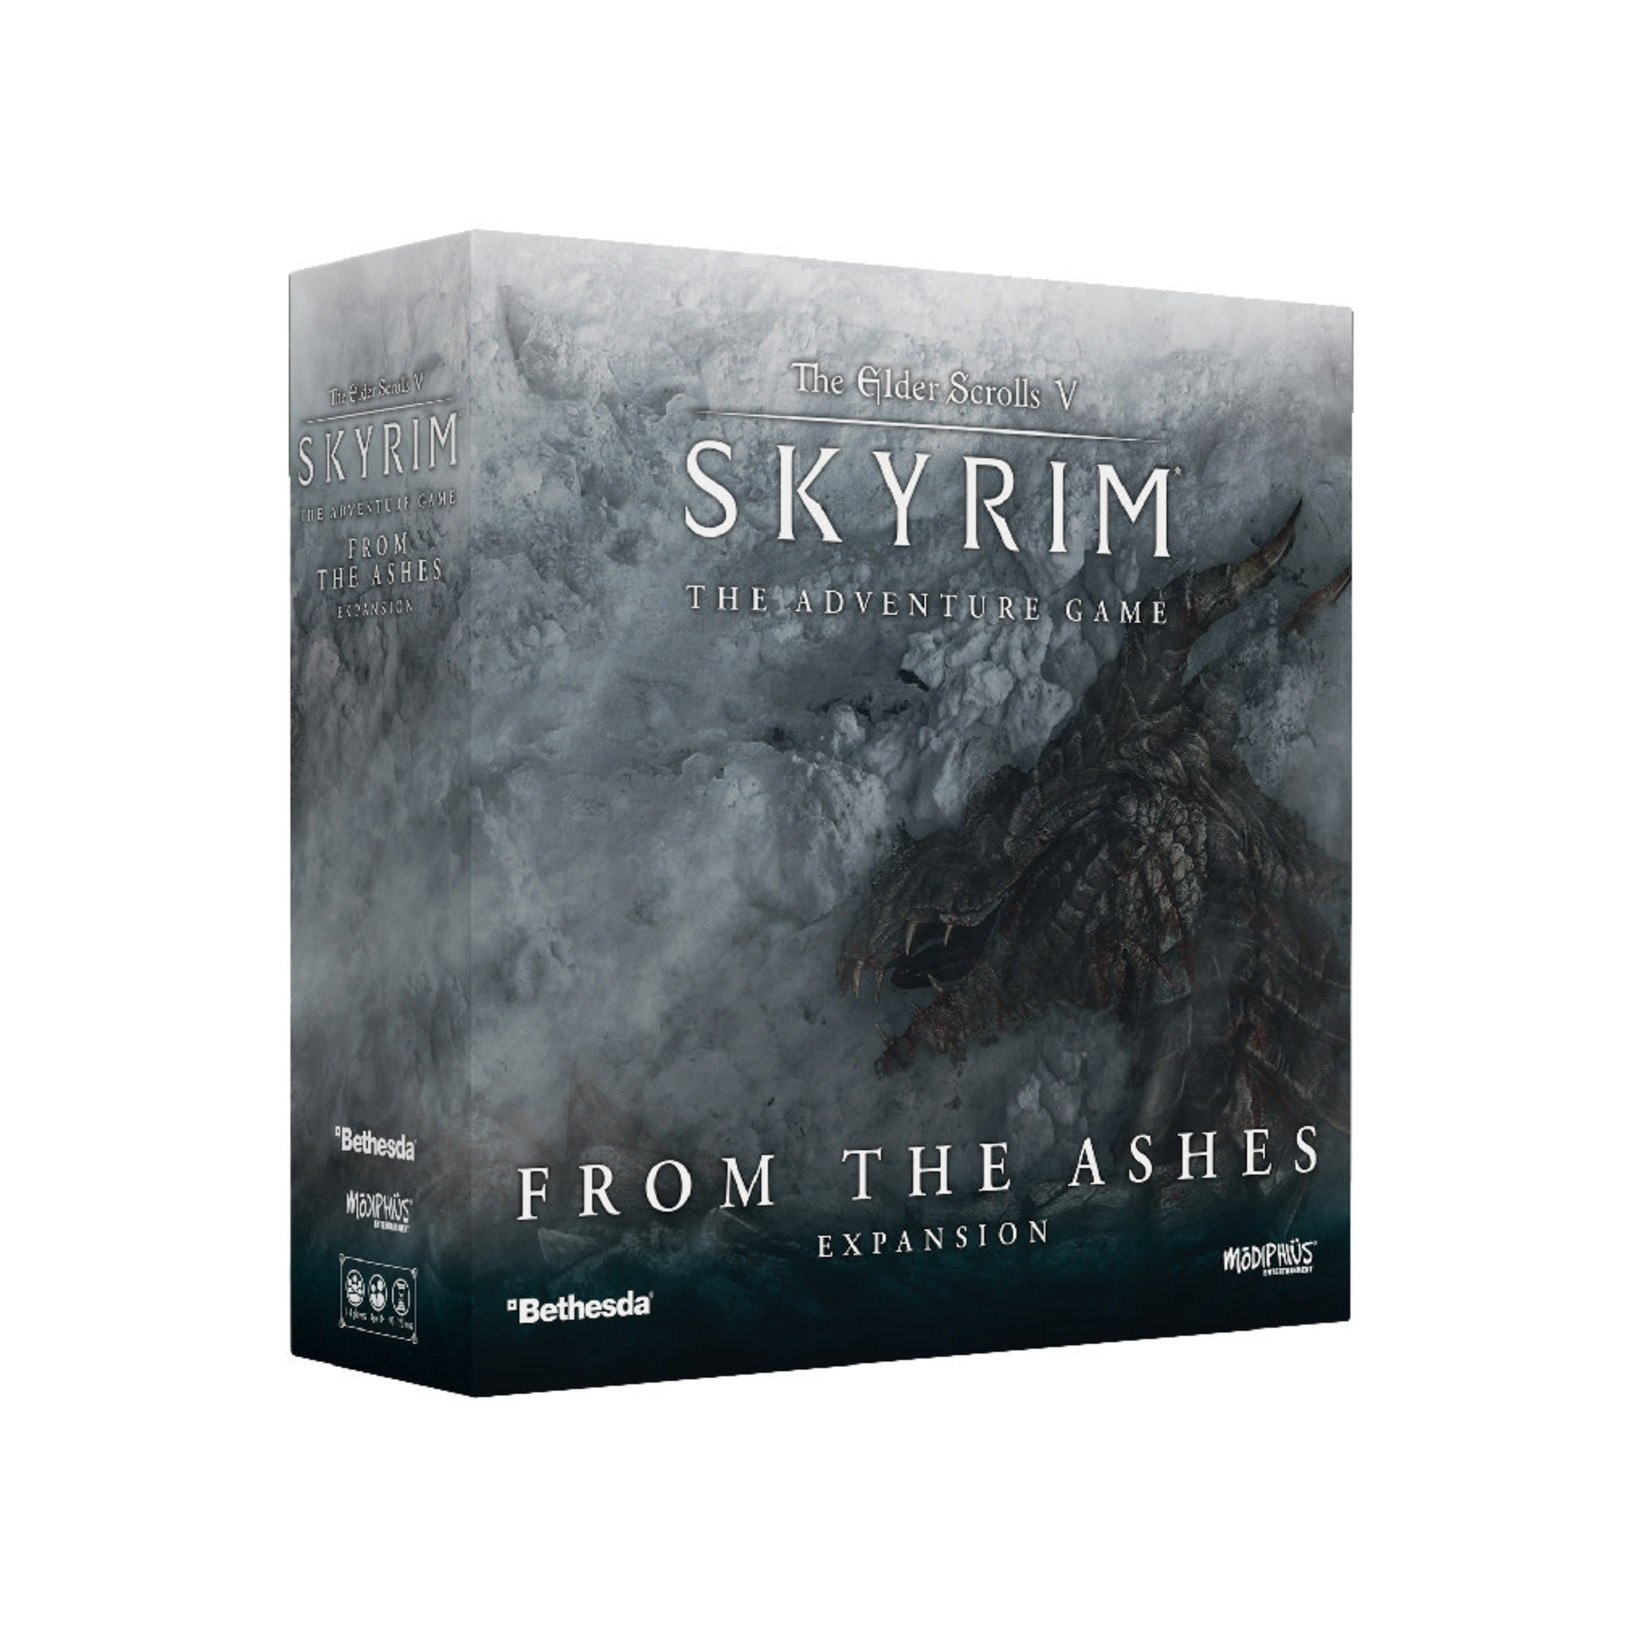 Modiphius The Elder Scrolls V Skyrim From the Ashes Expansion